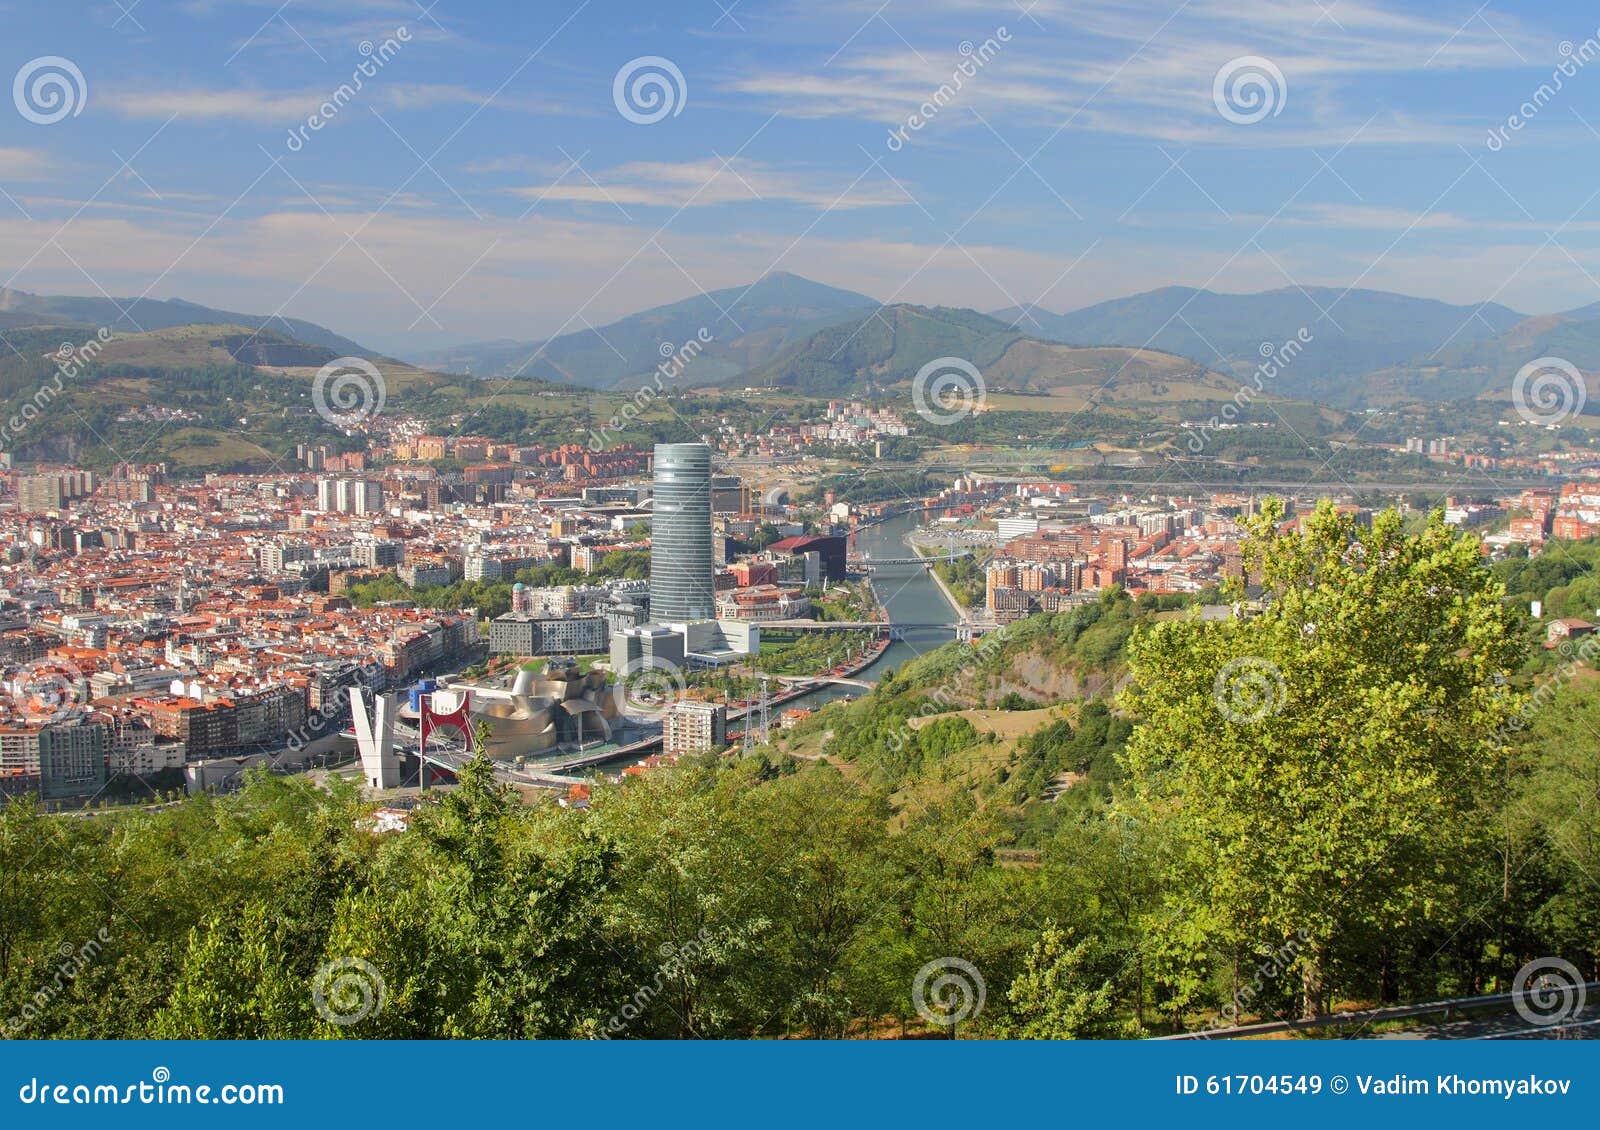 Spain, Bilbao, View of City from Above Stock Image - Image of panorama ...